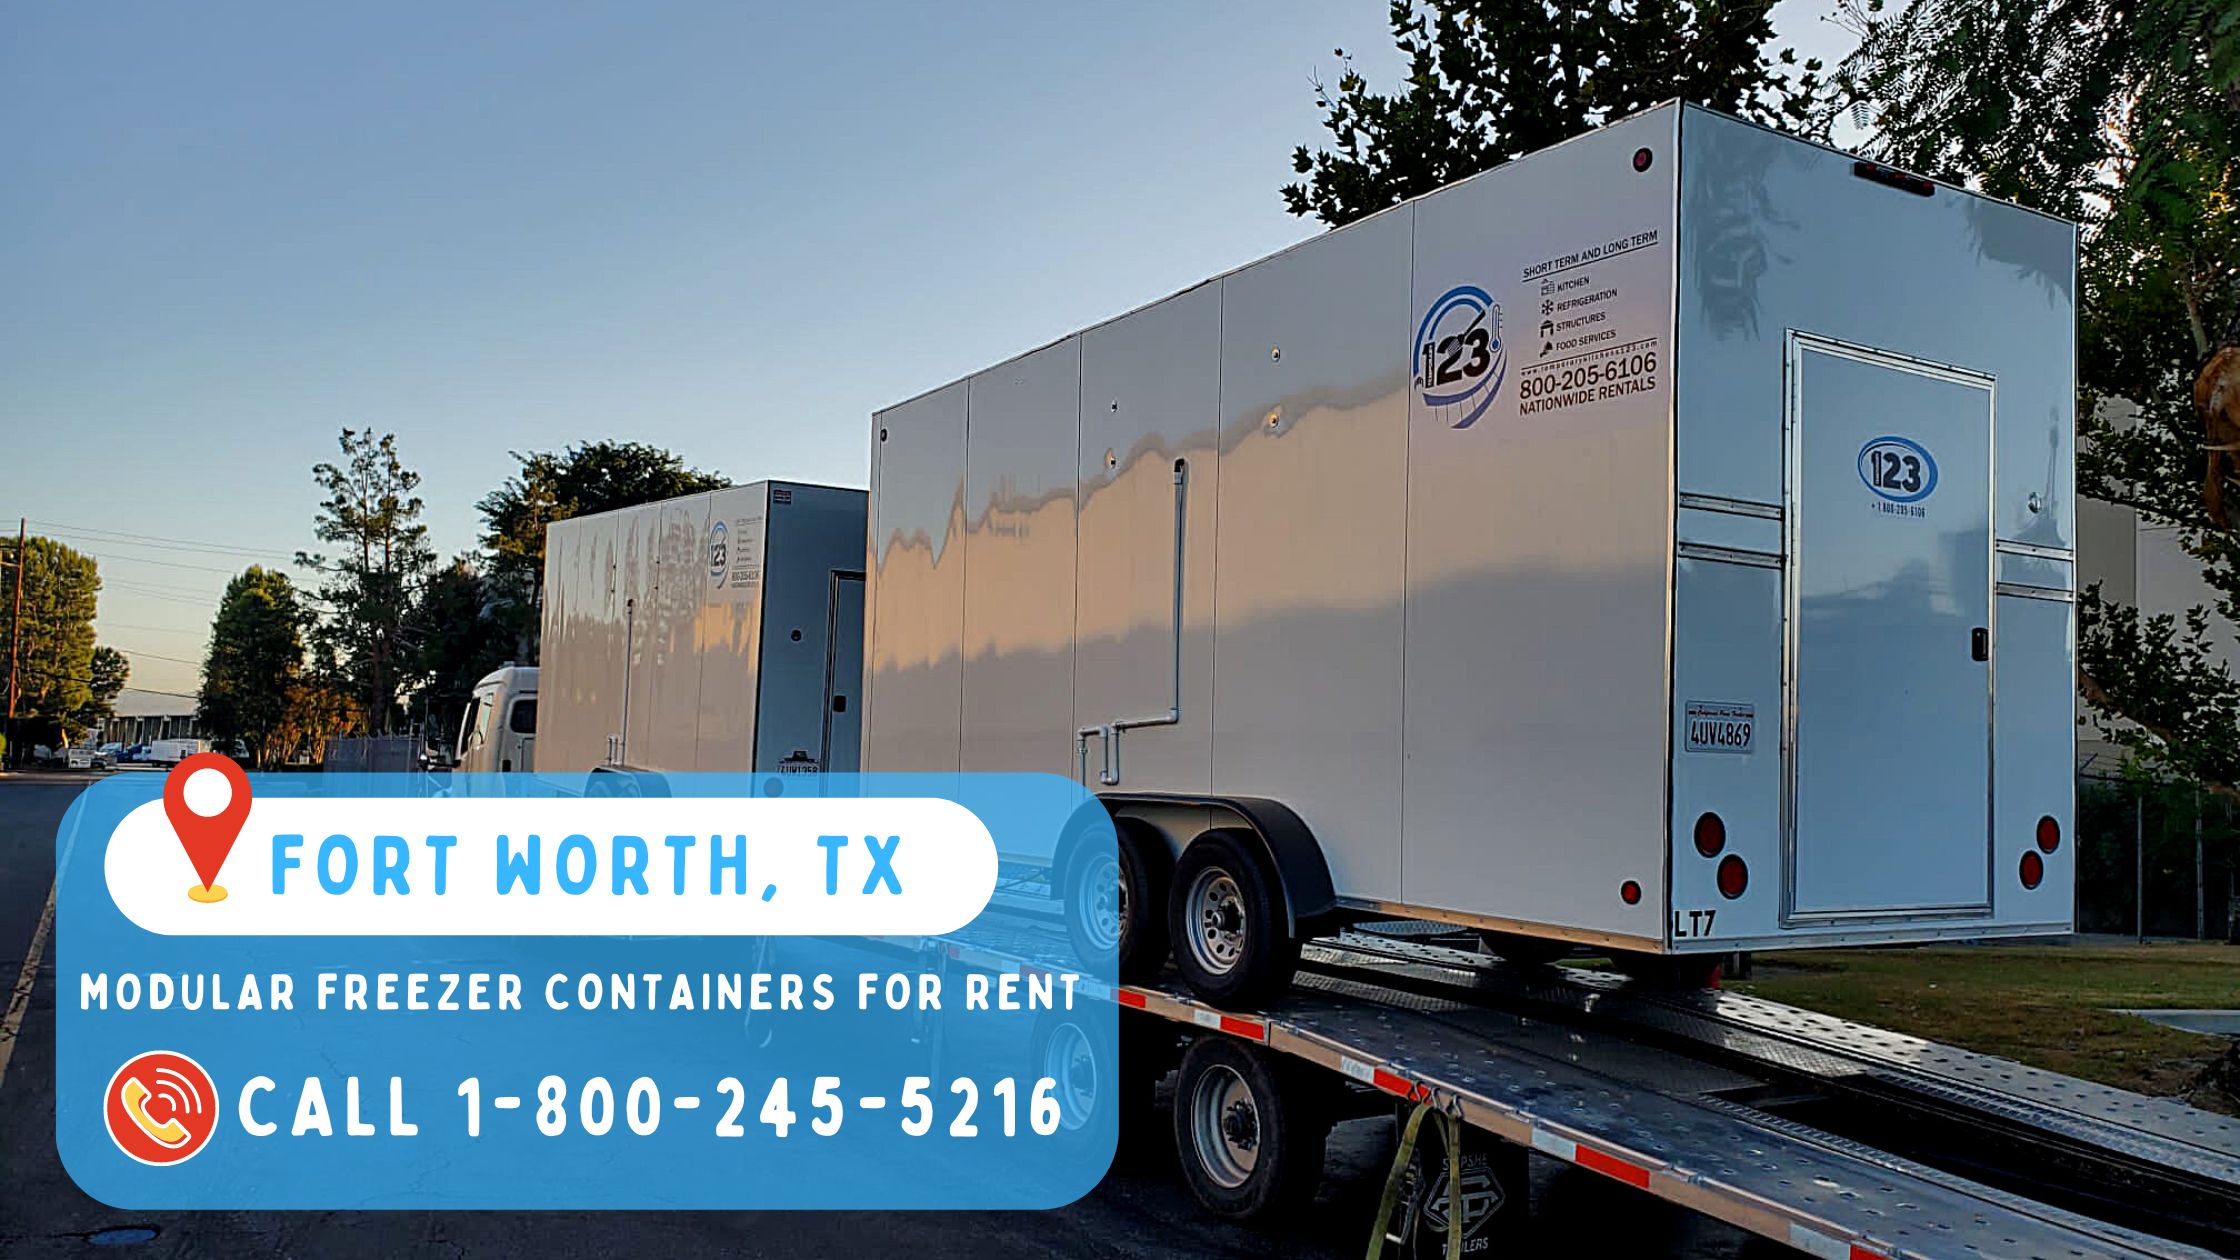 Modular Freezer Containers for Rent in Fort Worth